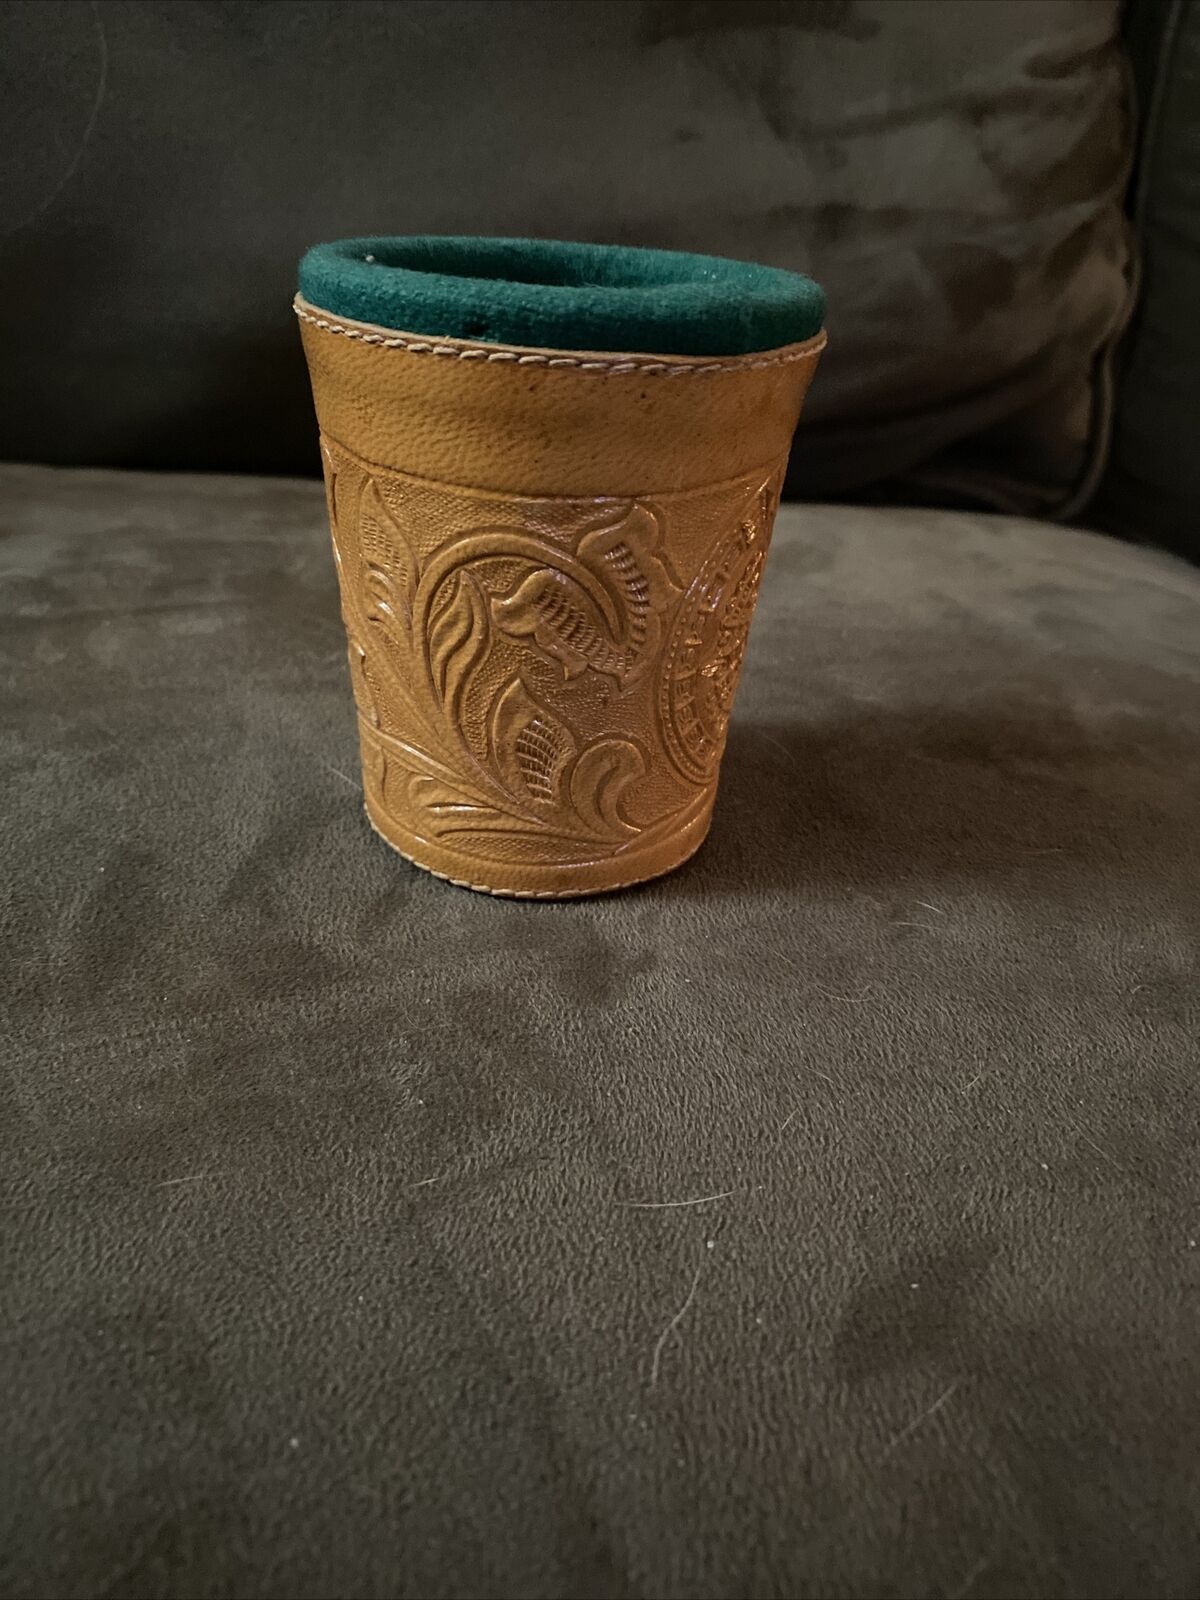 Vintage Tooled Leather Dice Cup Shaker Toiled Aztec Calendar And Floral Design